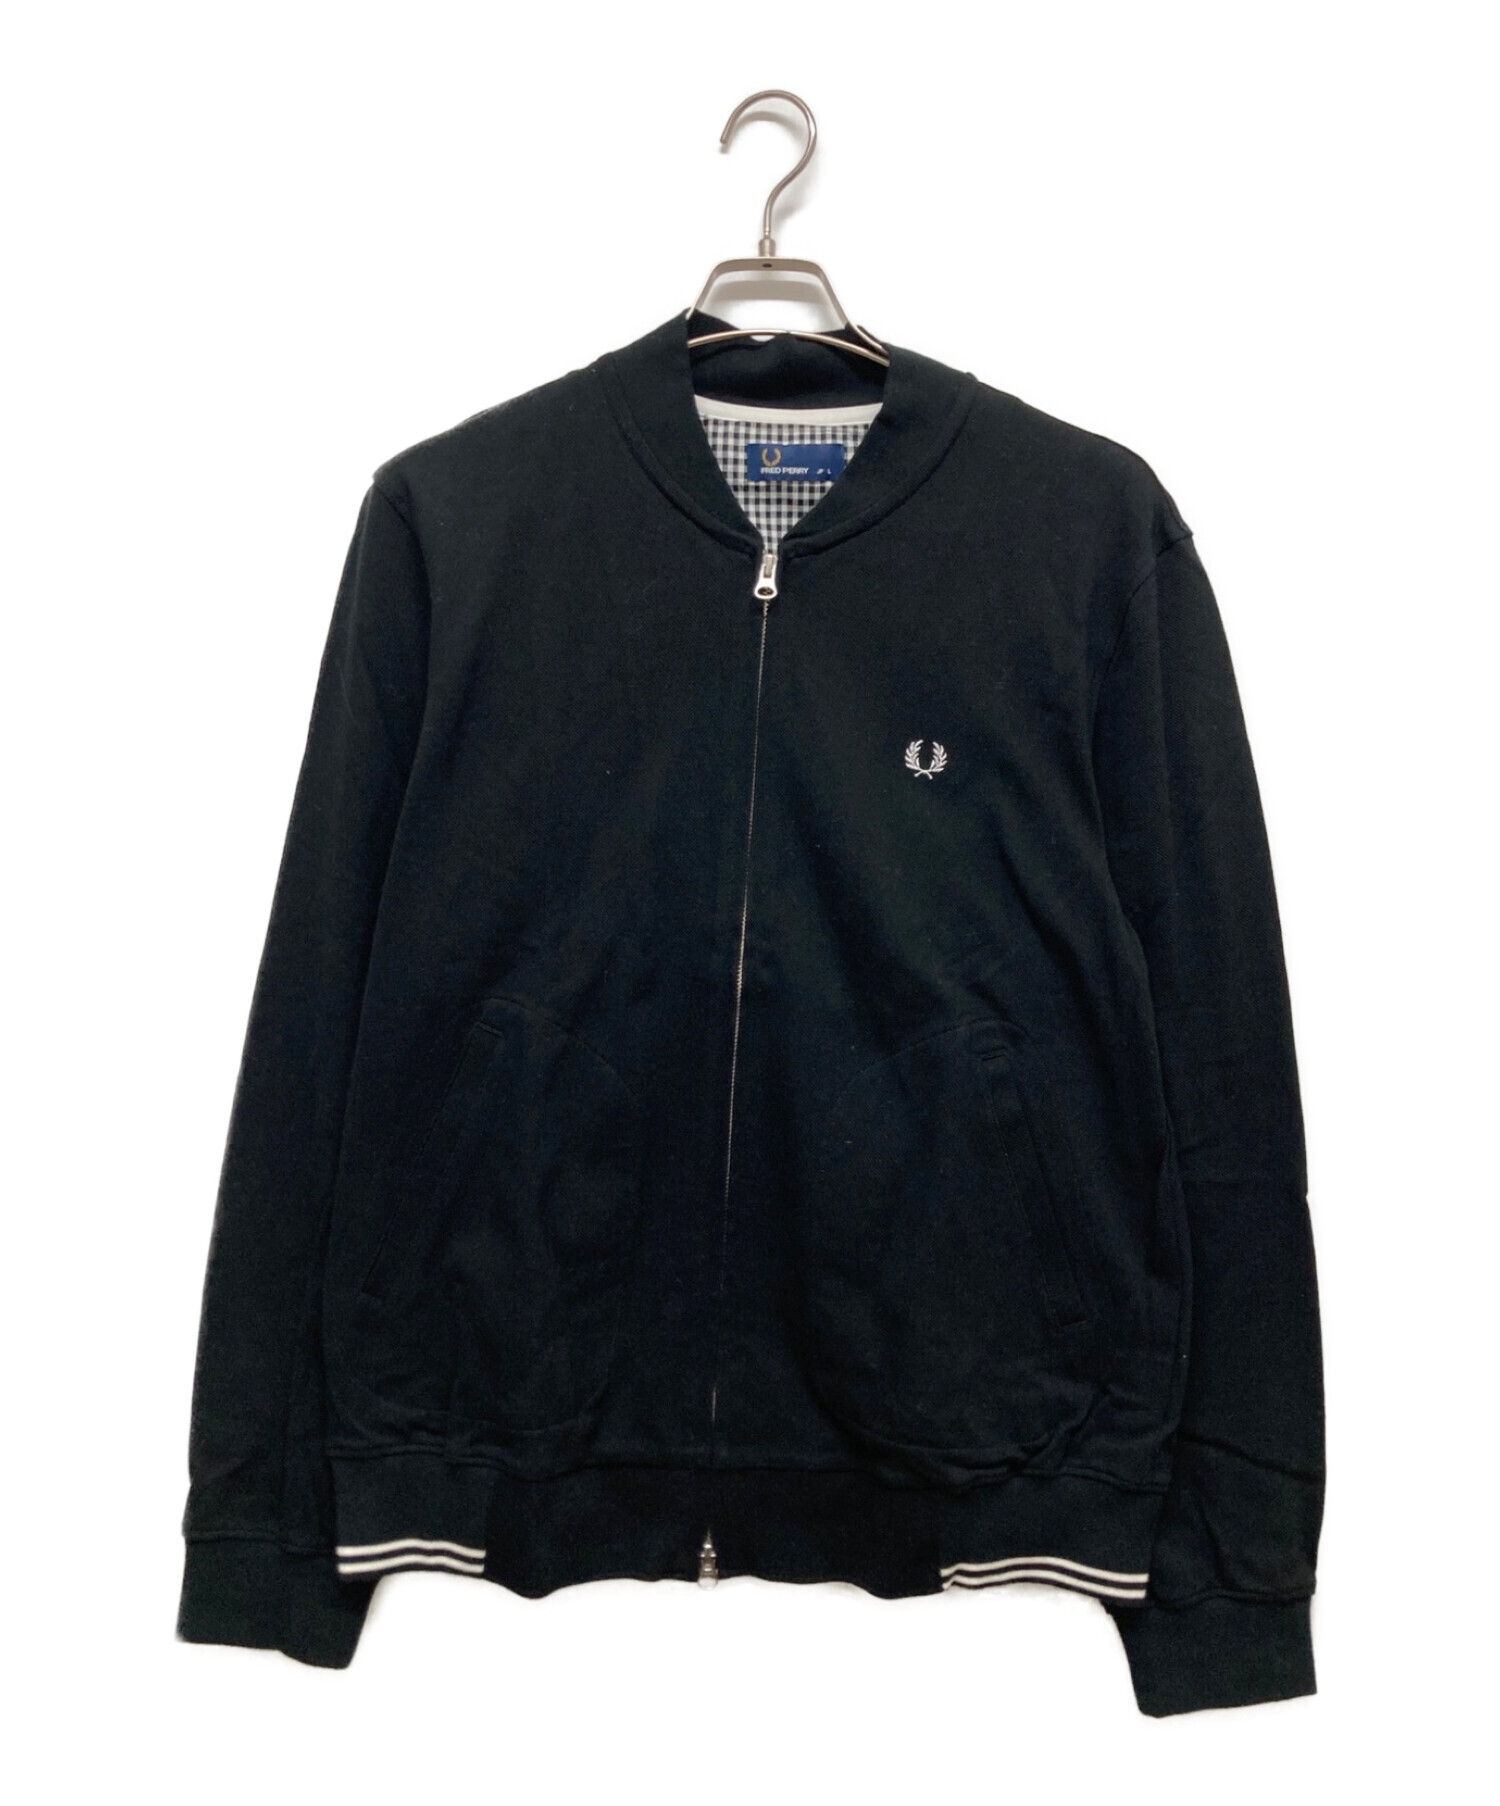 FRED PERRY ジップアップジャケット